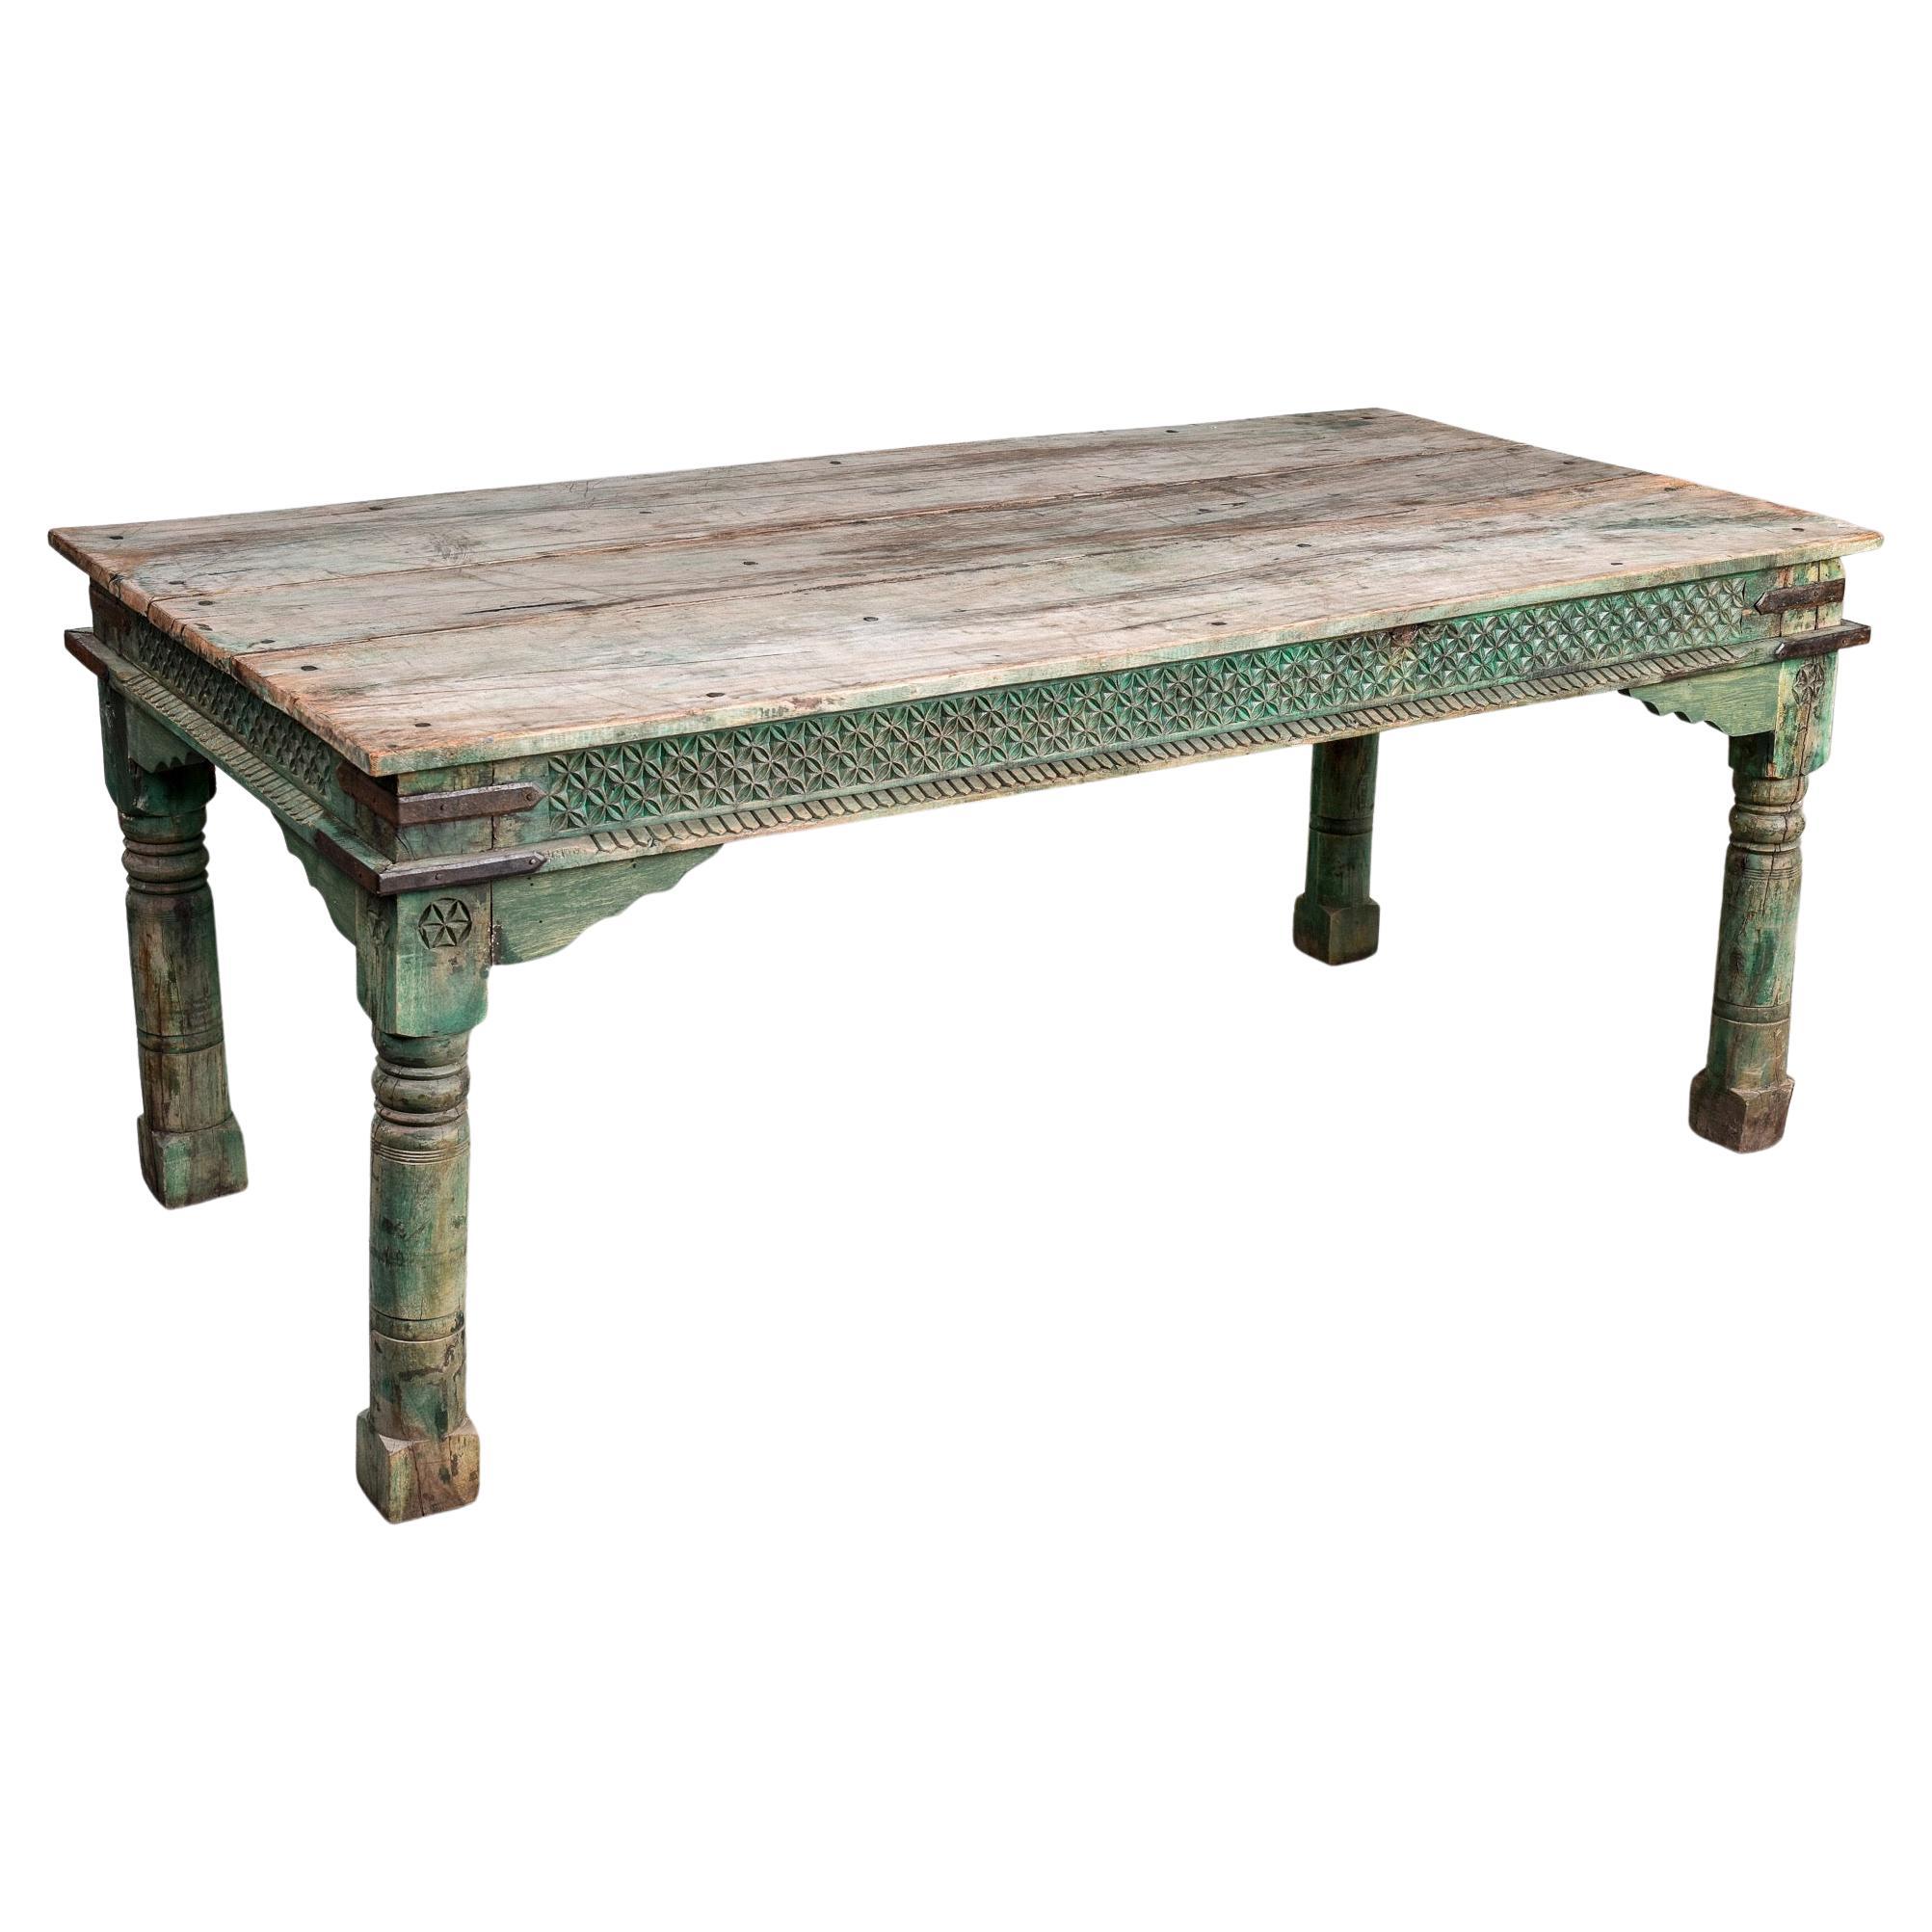 Vintage Carved and Painted Rustic Dining Table